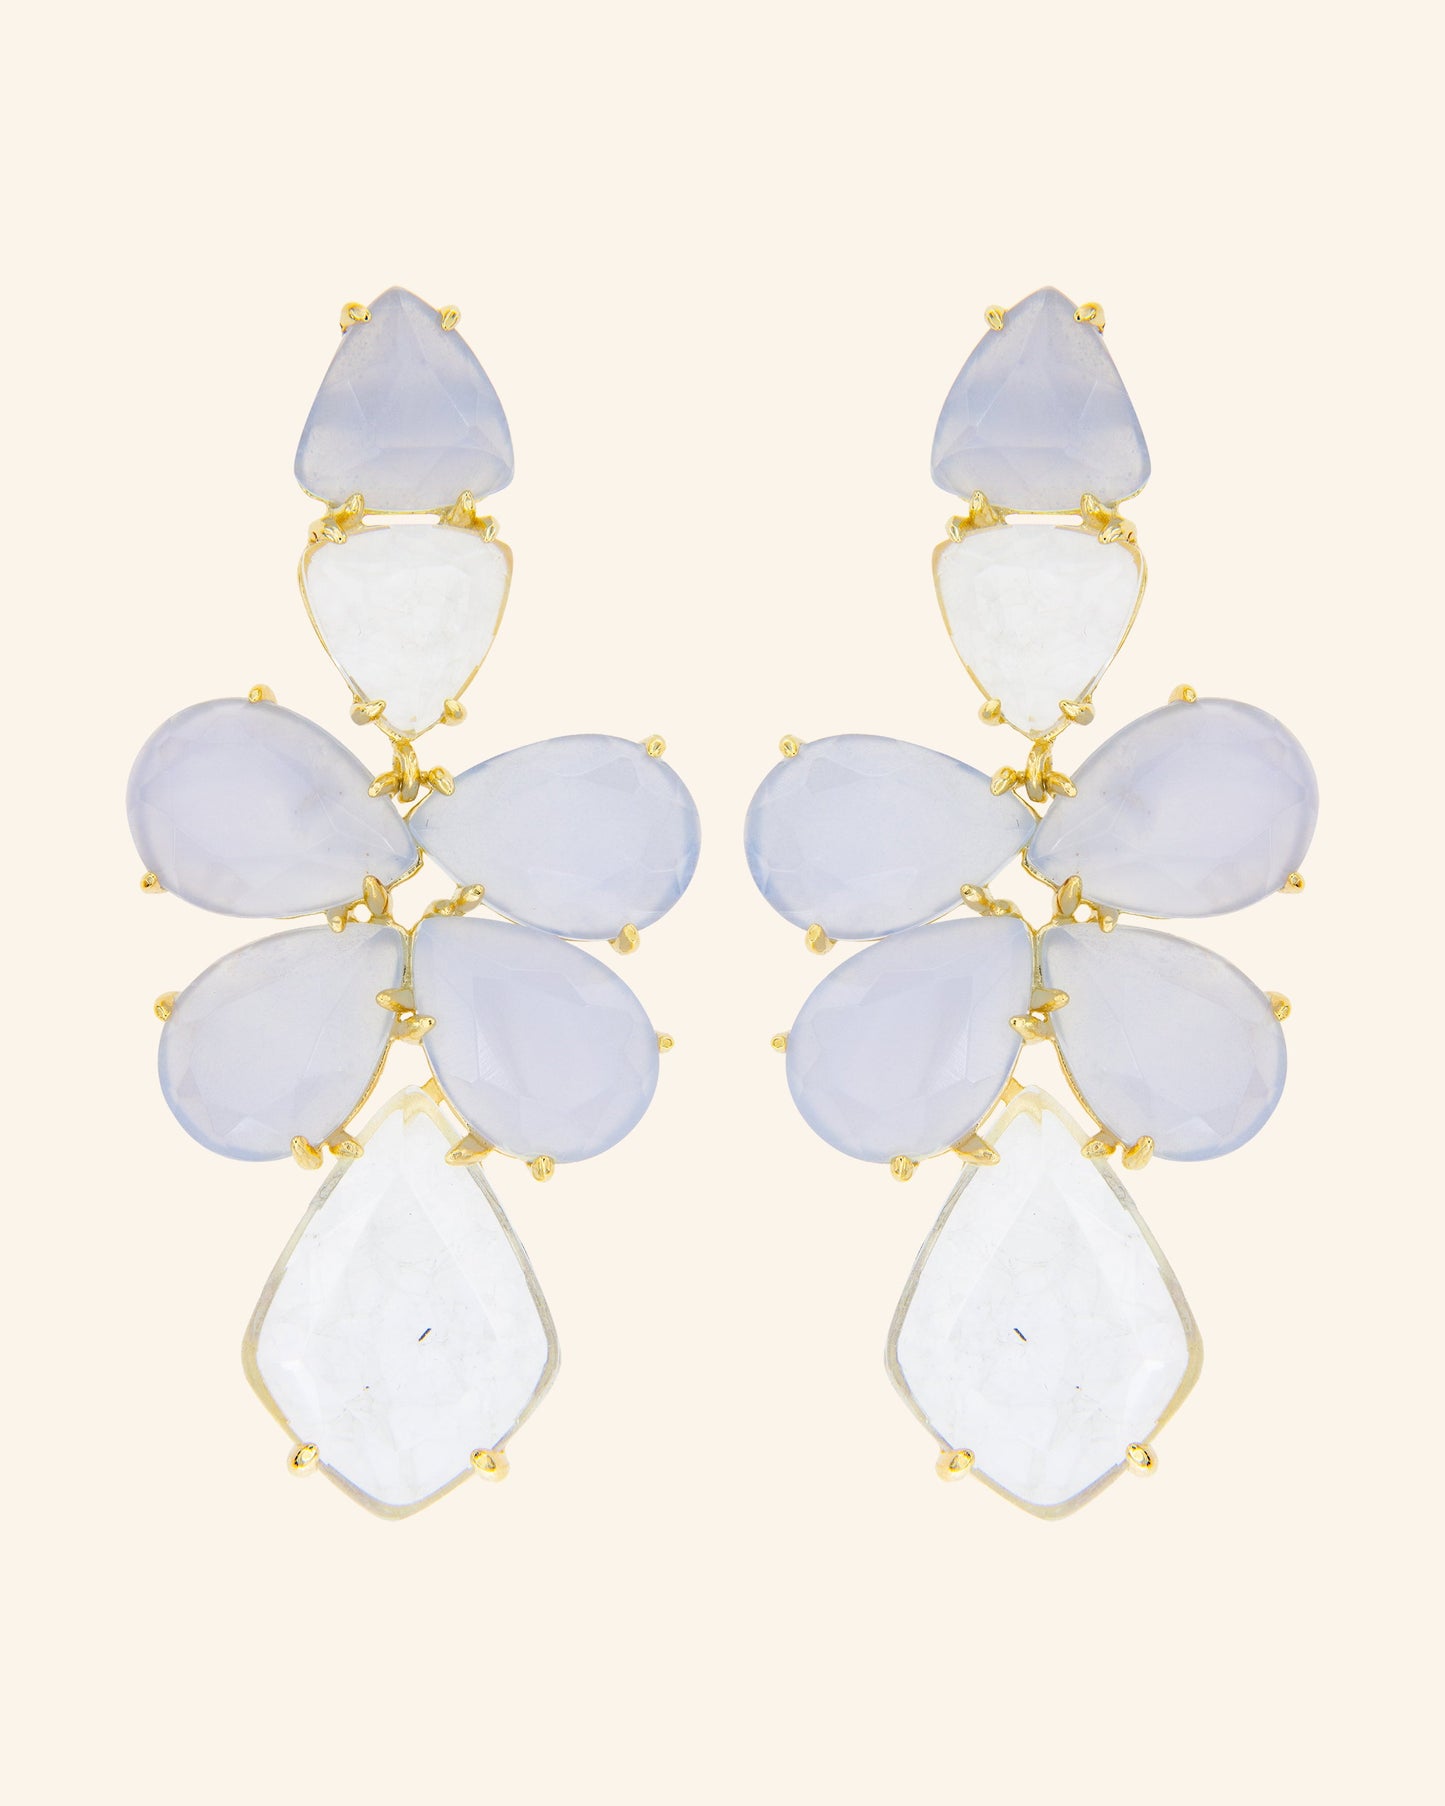 Polar earrings with chalcedony and colorless quartz